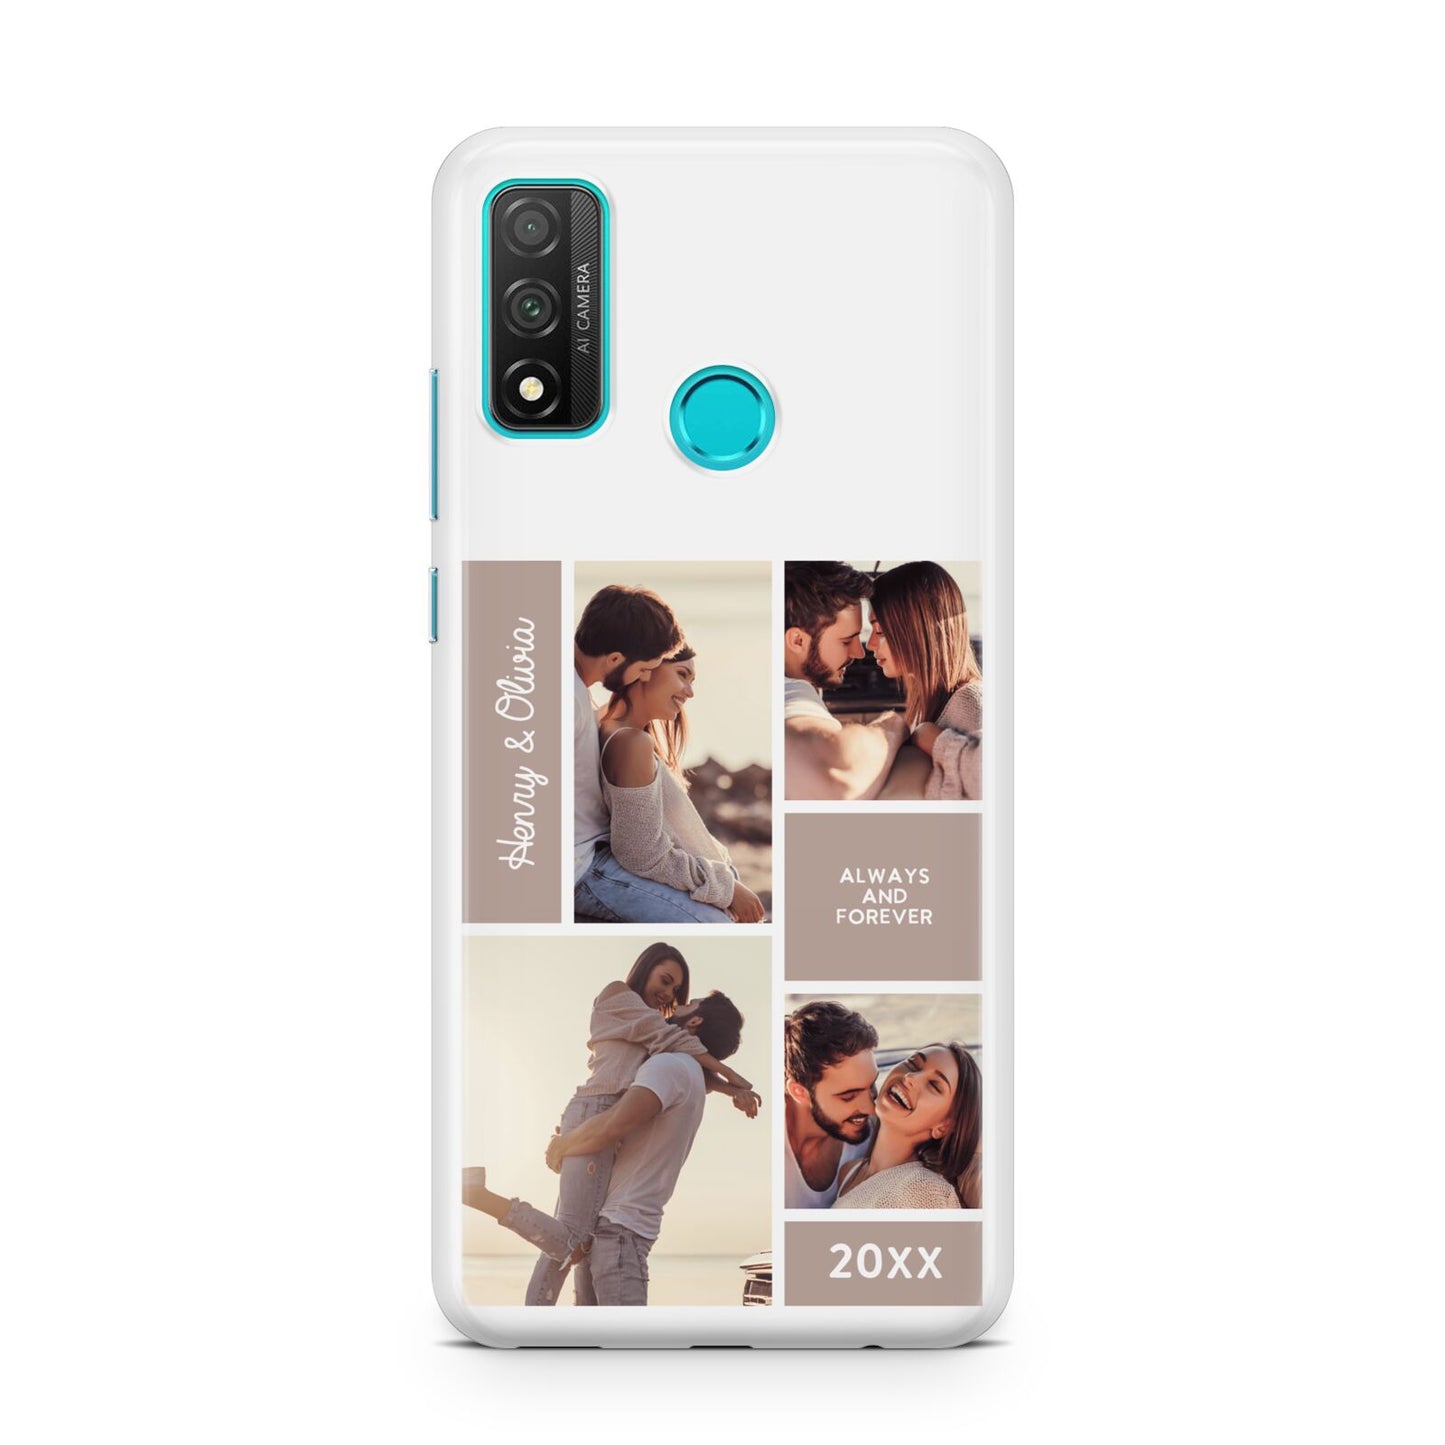 Couples Valentine Photo Collage Personalised Huawei P Smart 2020